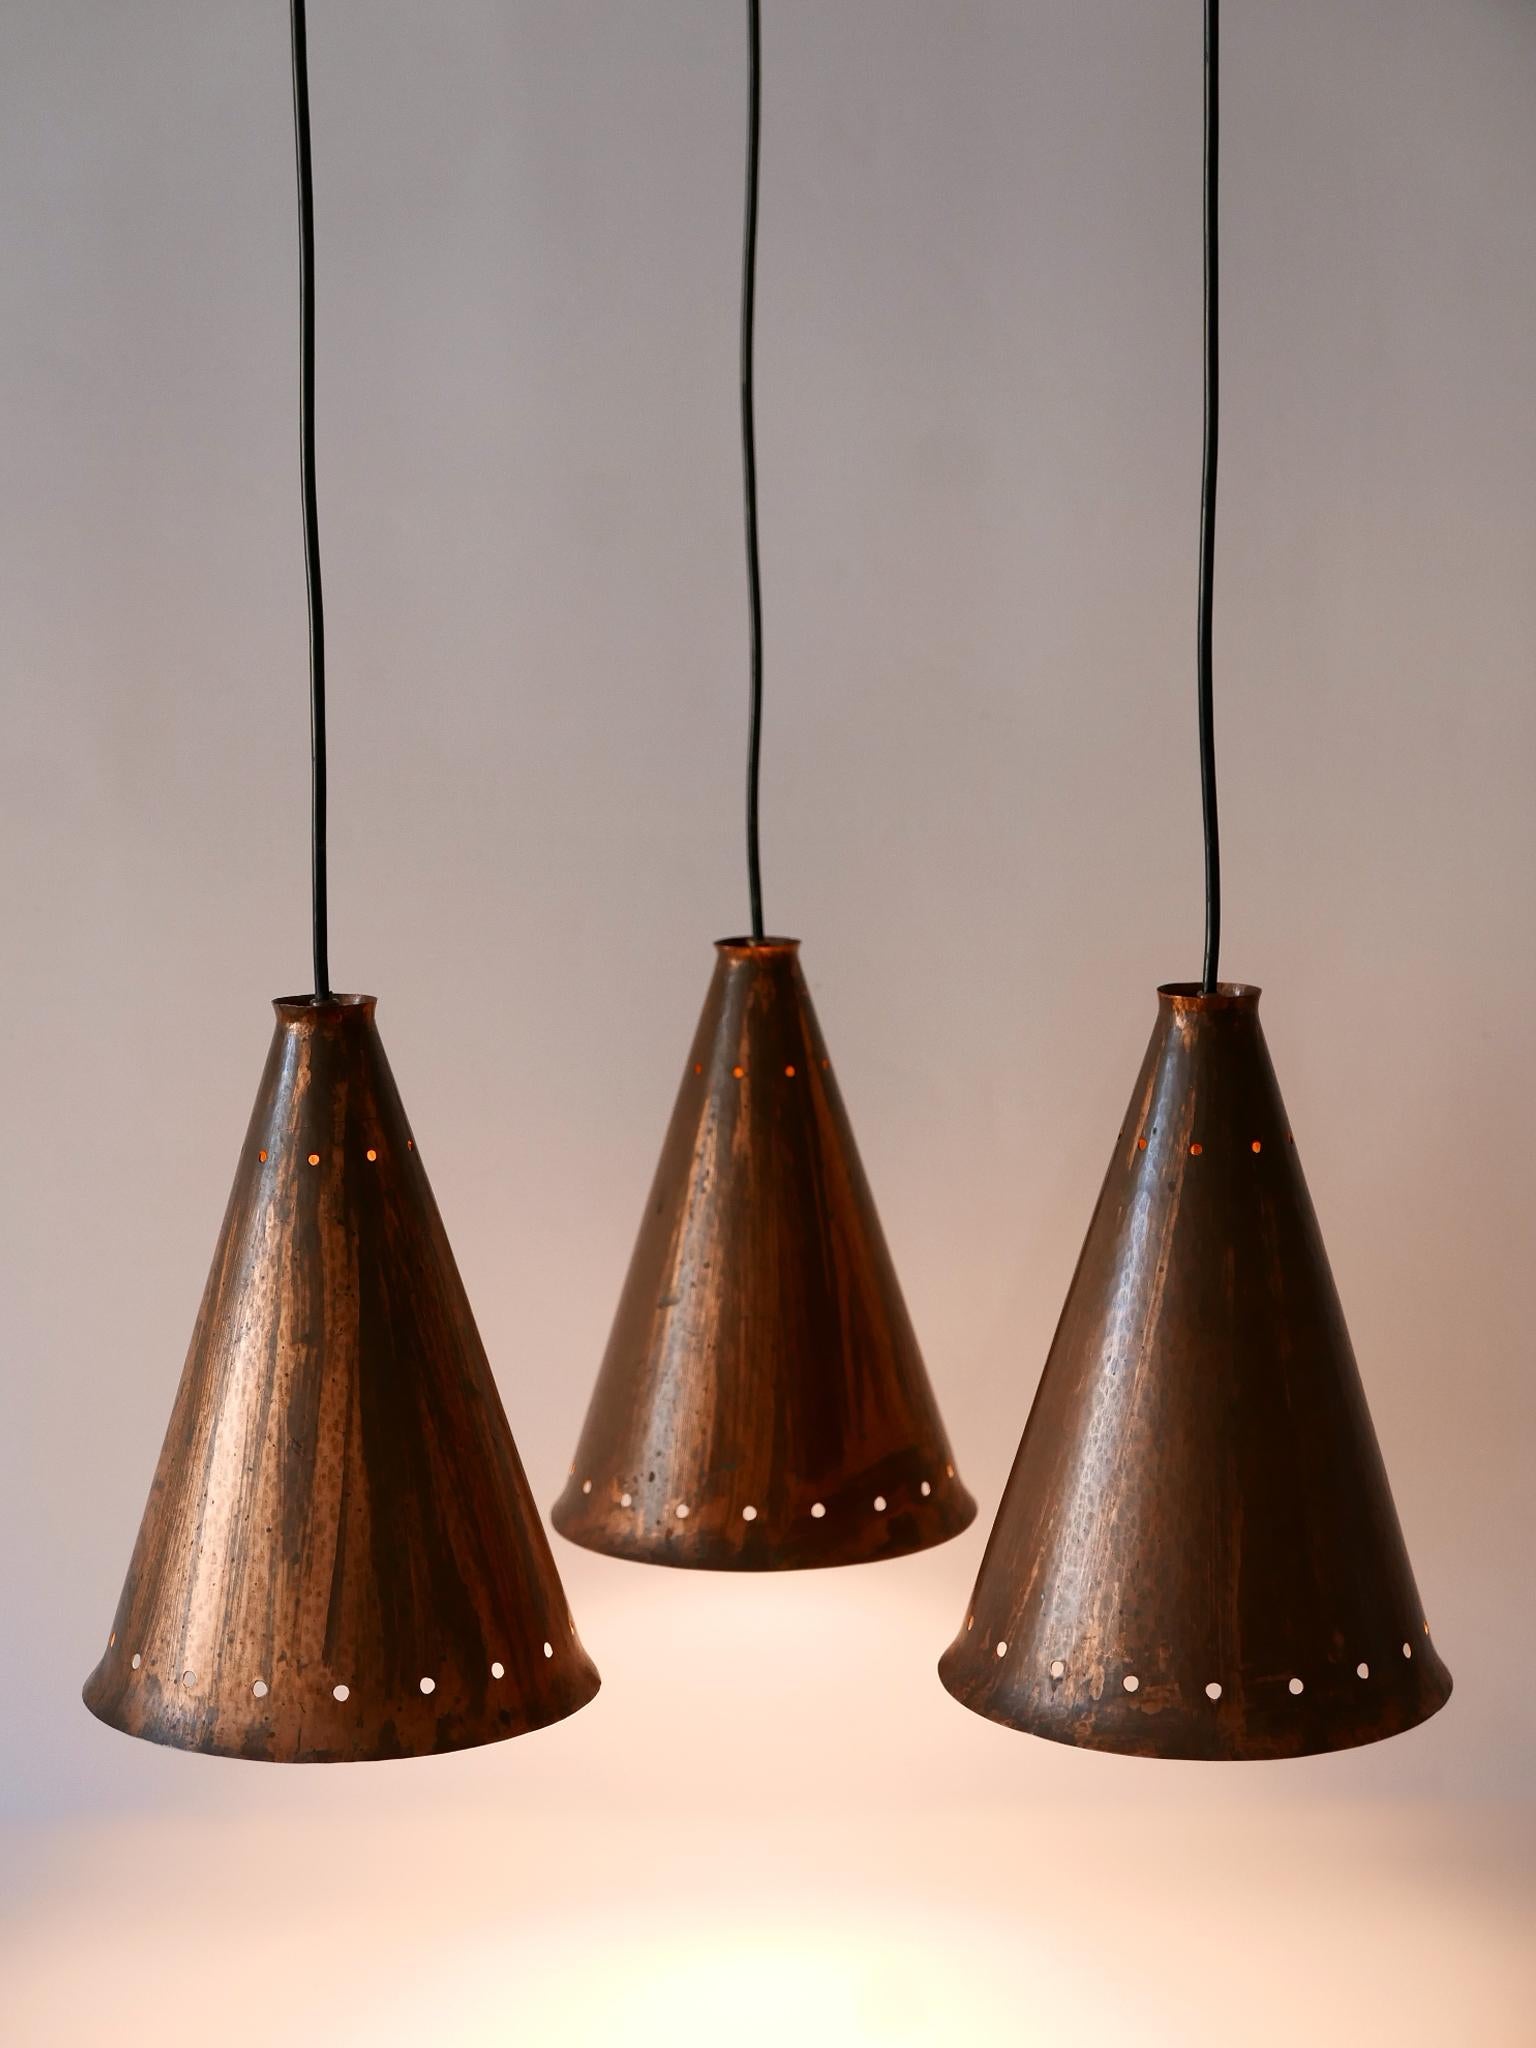 Exceptional & Large Mid-Century Modern Copper Pendant Lamp Scandinavia, 1950s For Sale 3